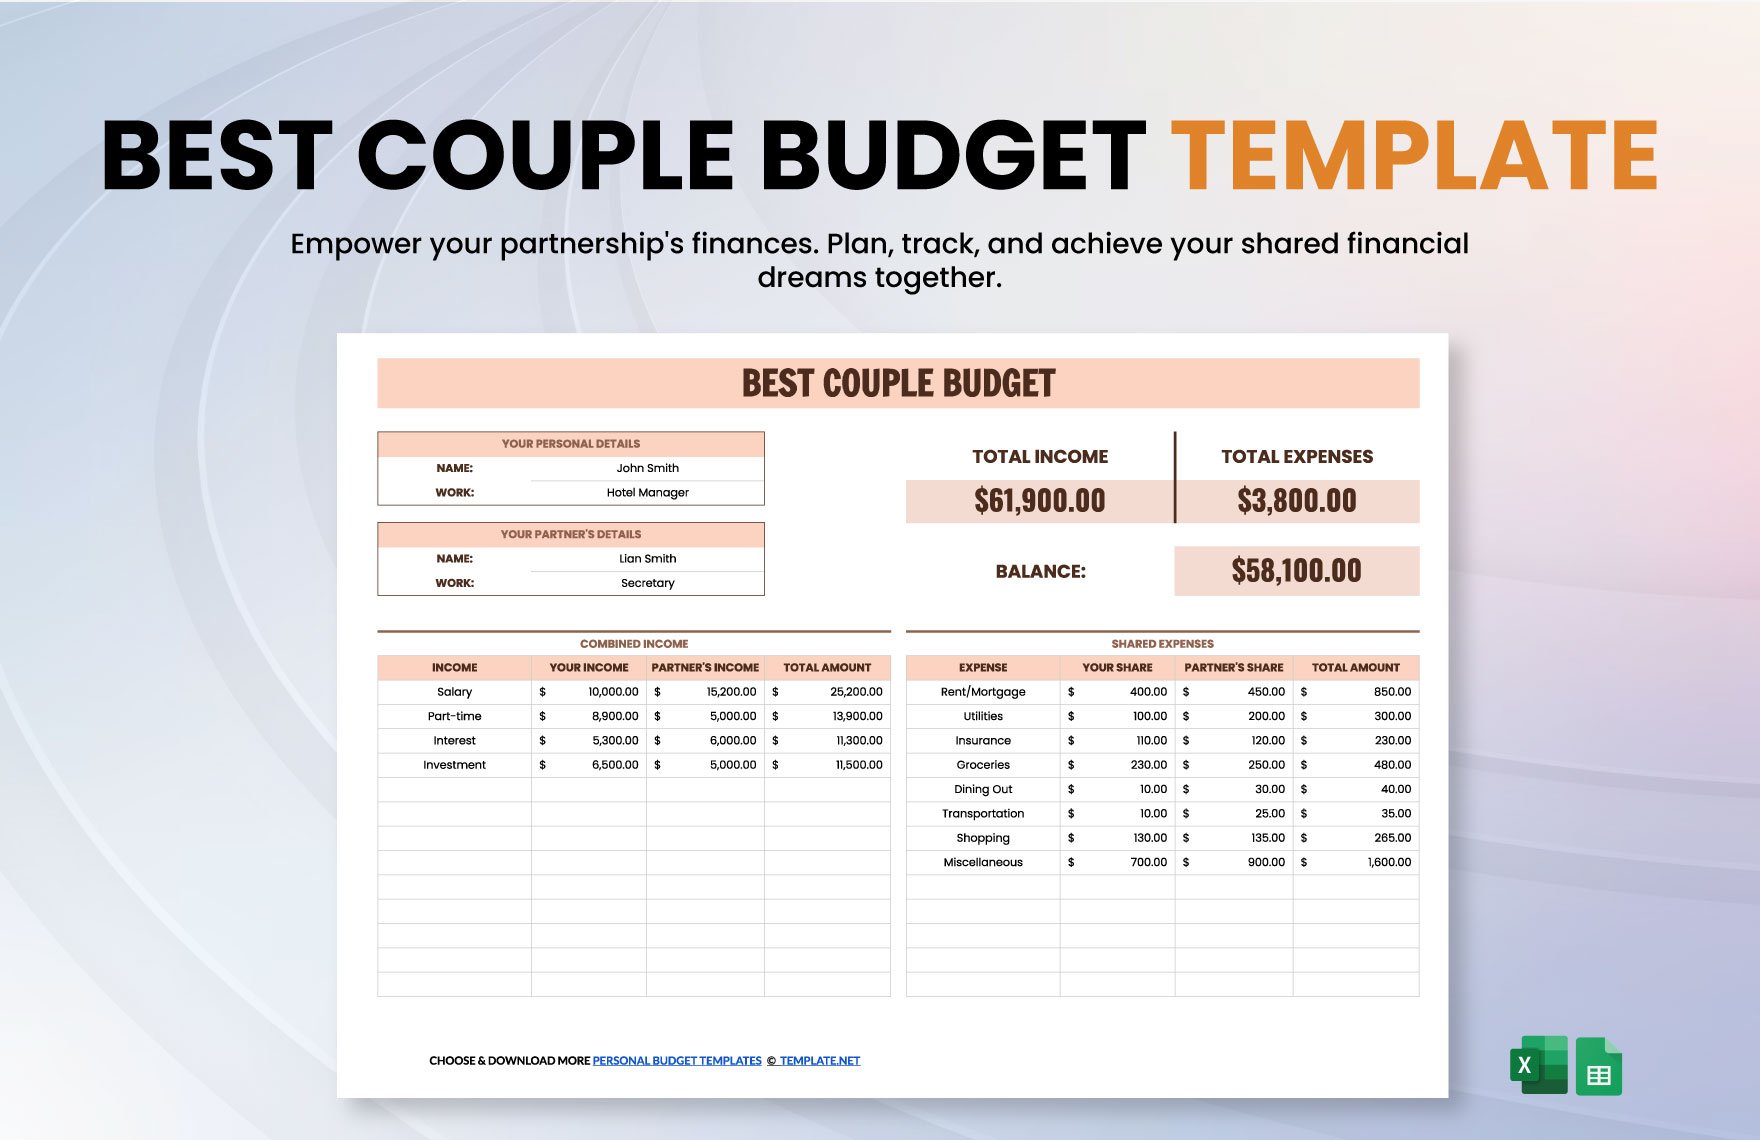 Free Best Couple Budget Template in Excel, Google Sheets